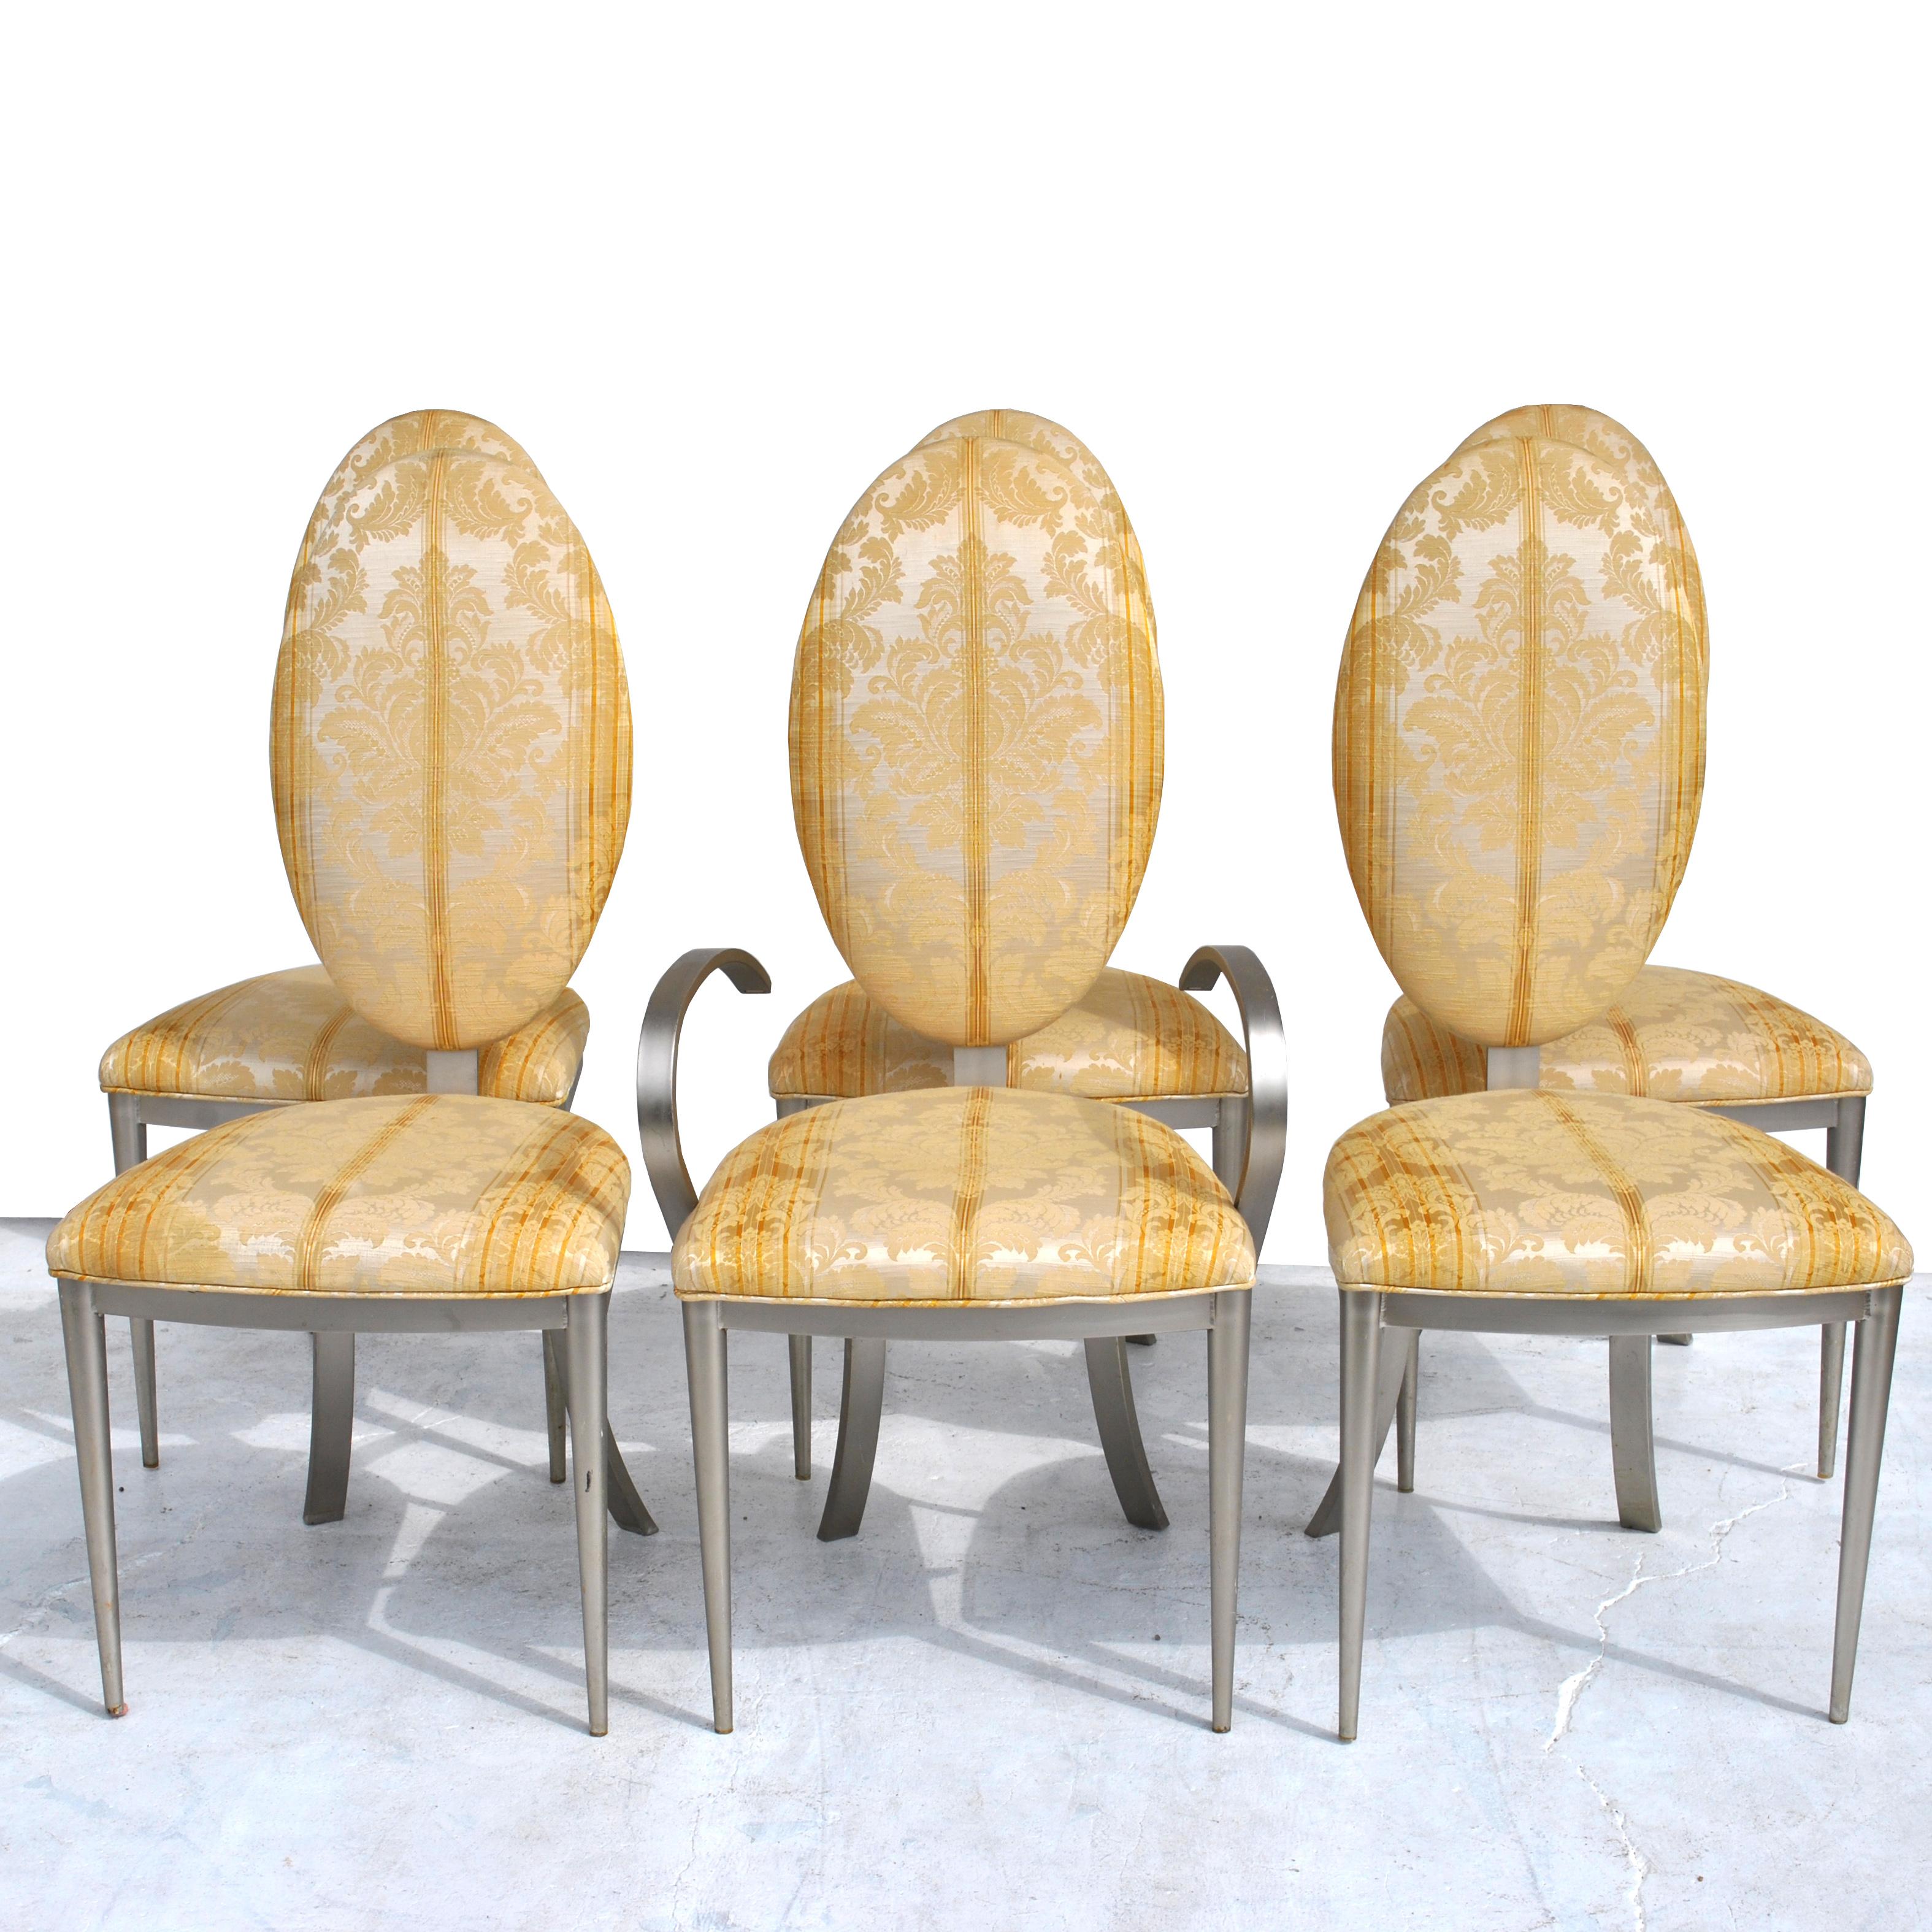 Set 0f 6 DIA dining chairs
Neoclassical lines with a modern twist in a brushed metal frame and a rich Damask fabric.
1 armchair and 5 side chairs.

Measures: Side chair 19